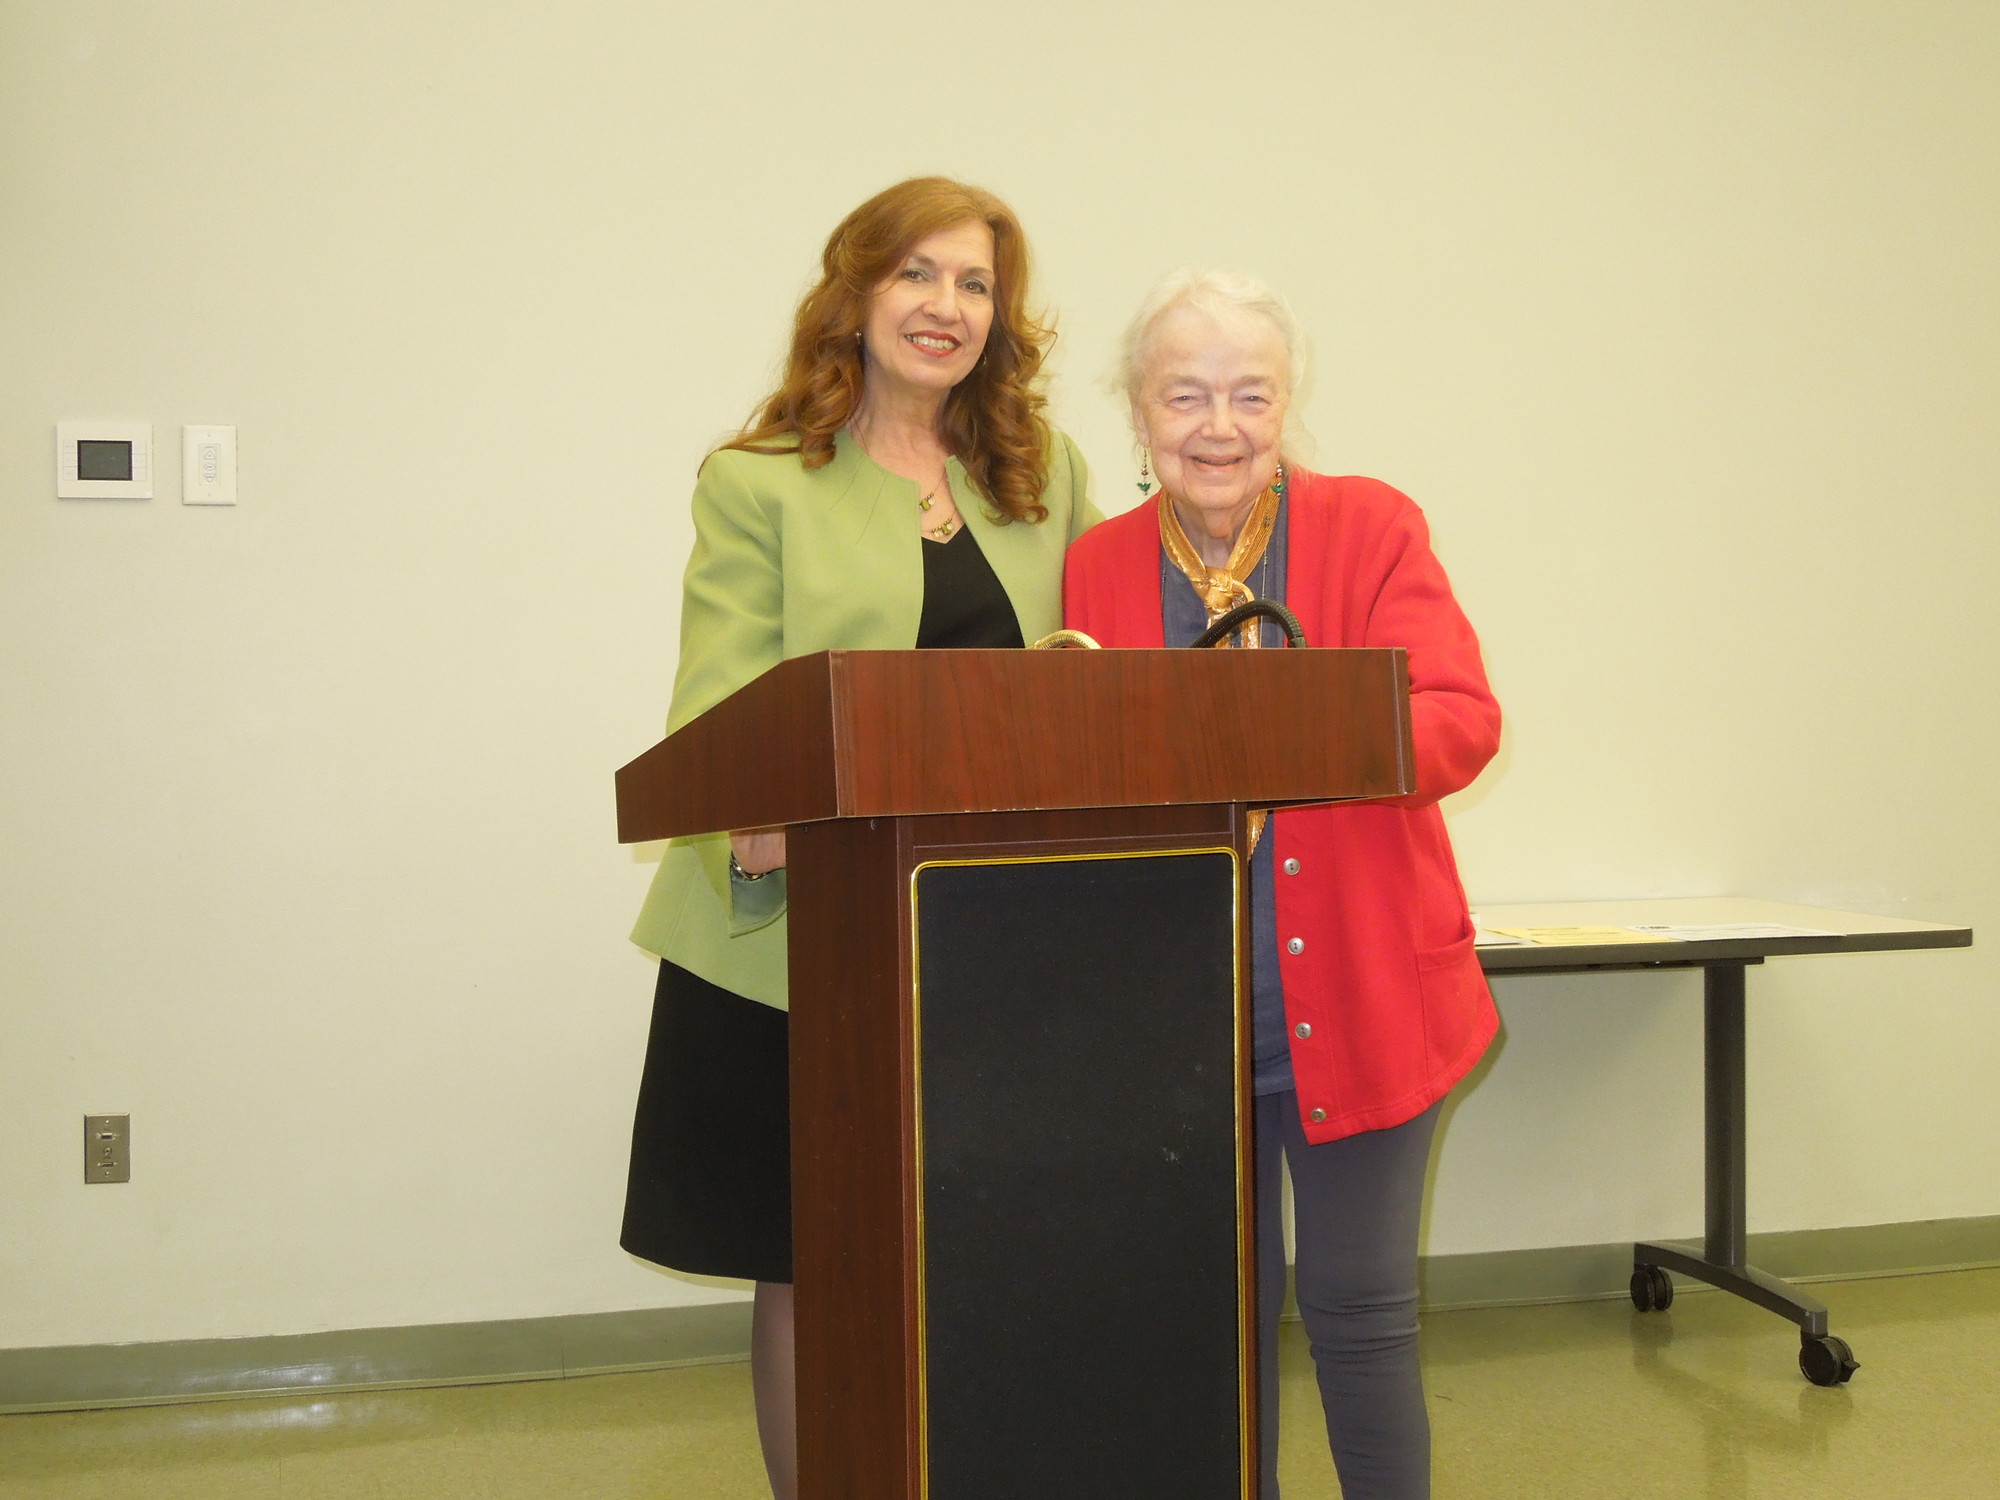 Lorraine LoFrese Conlin, with poet Lois Walker, who is also the founder of the Long island Poetry Collective.